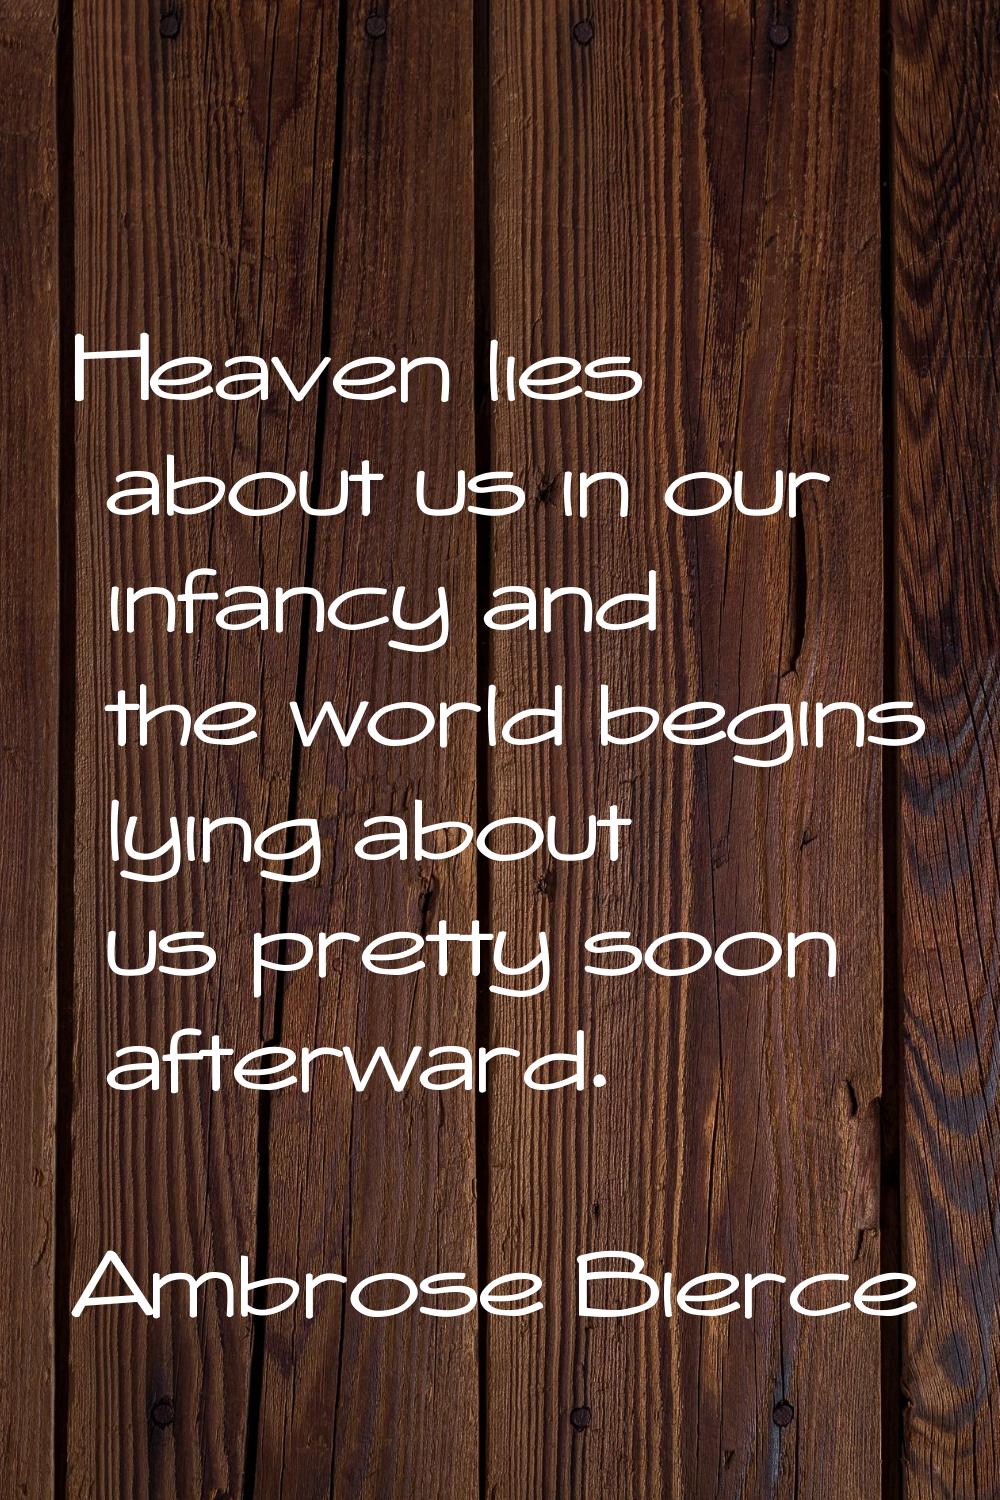 Heaven lies about us in our infancy and the world begins lying about us pretty soon afterward.